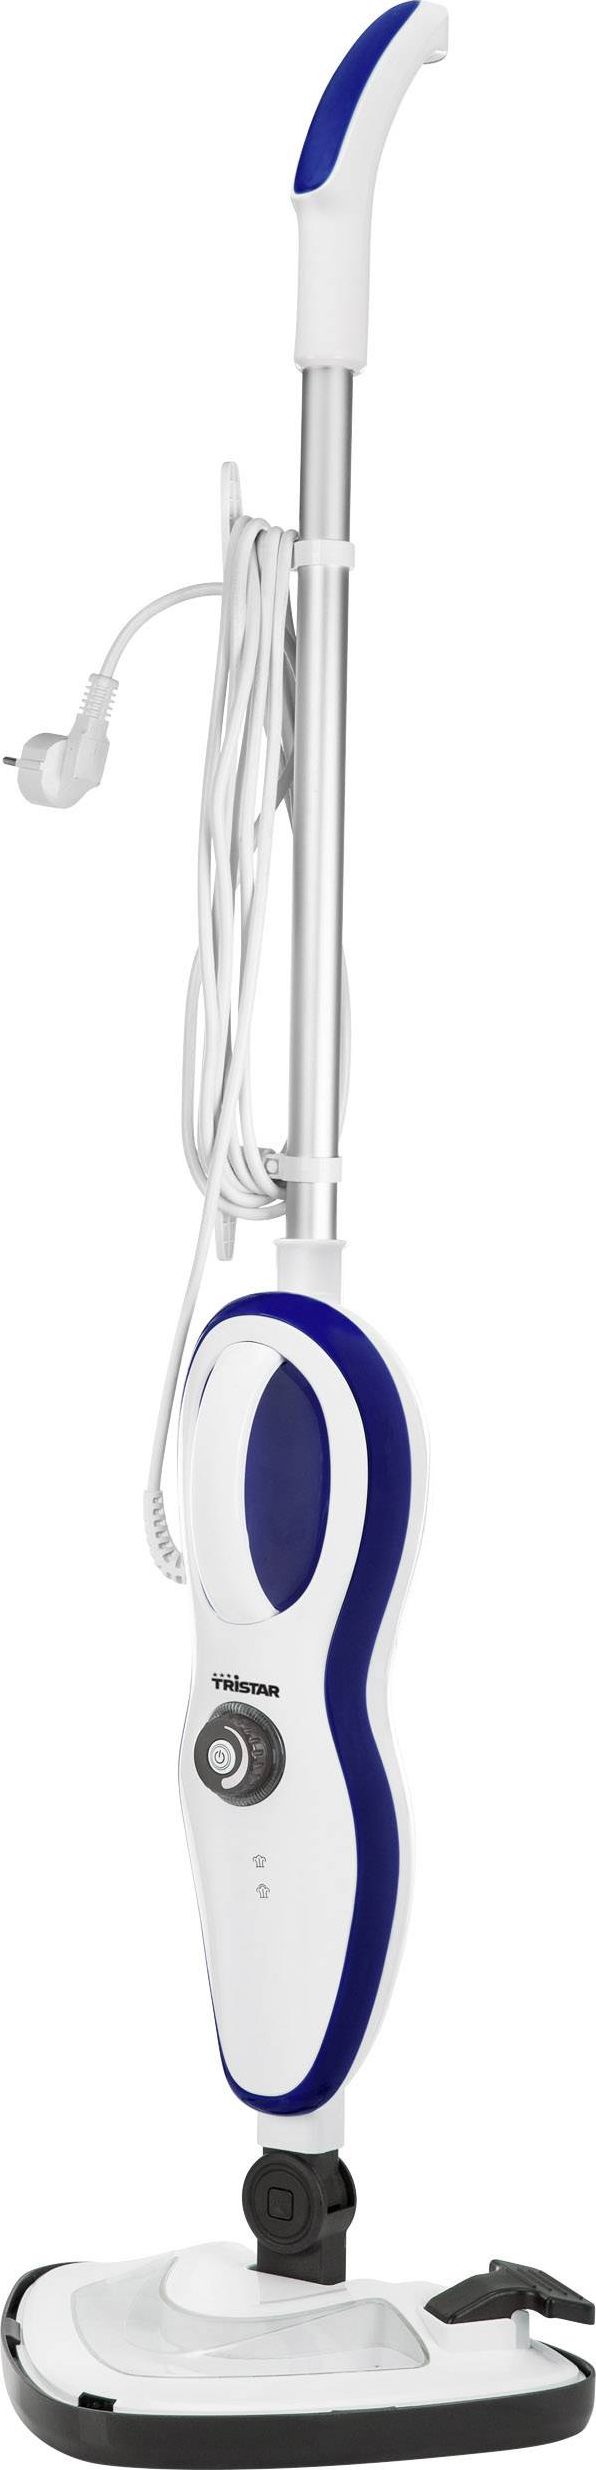 Tristar steam mop silver-5261 - for hard floors and carpets Gludeklis